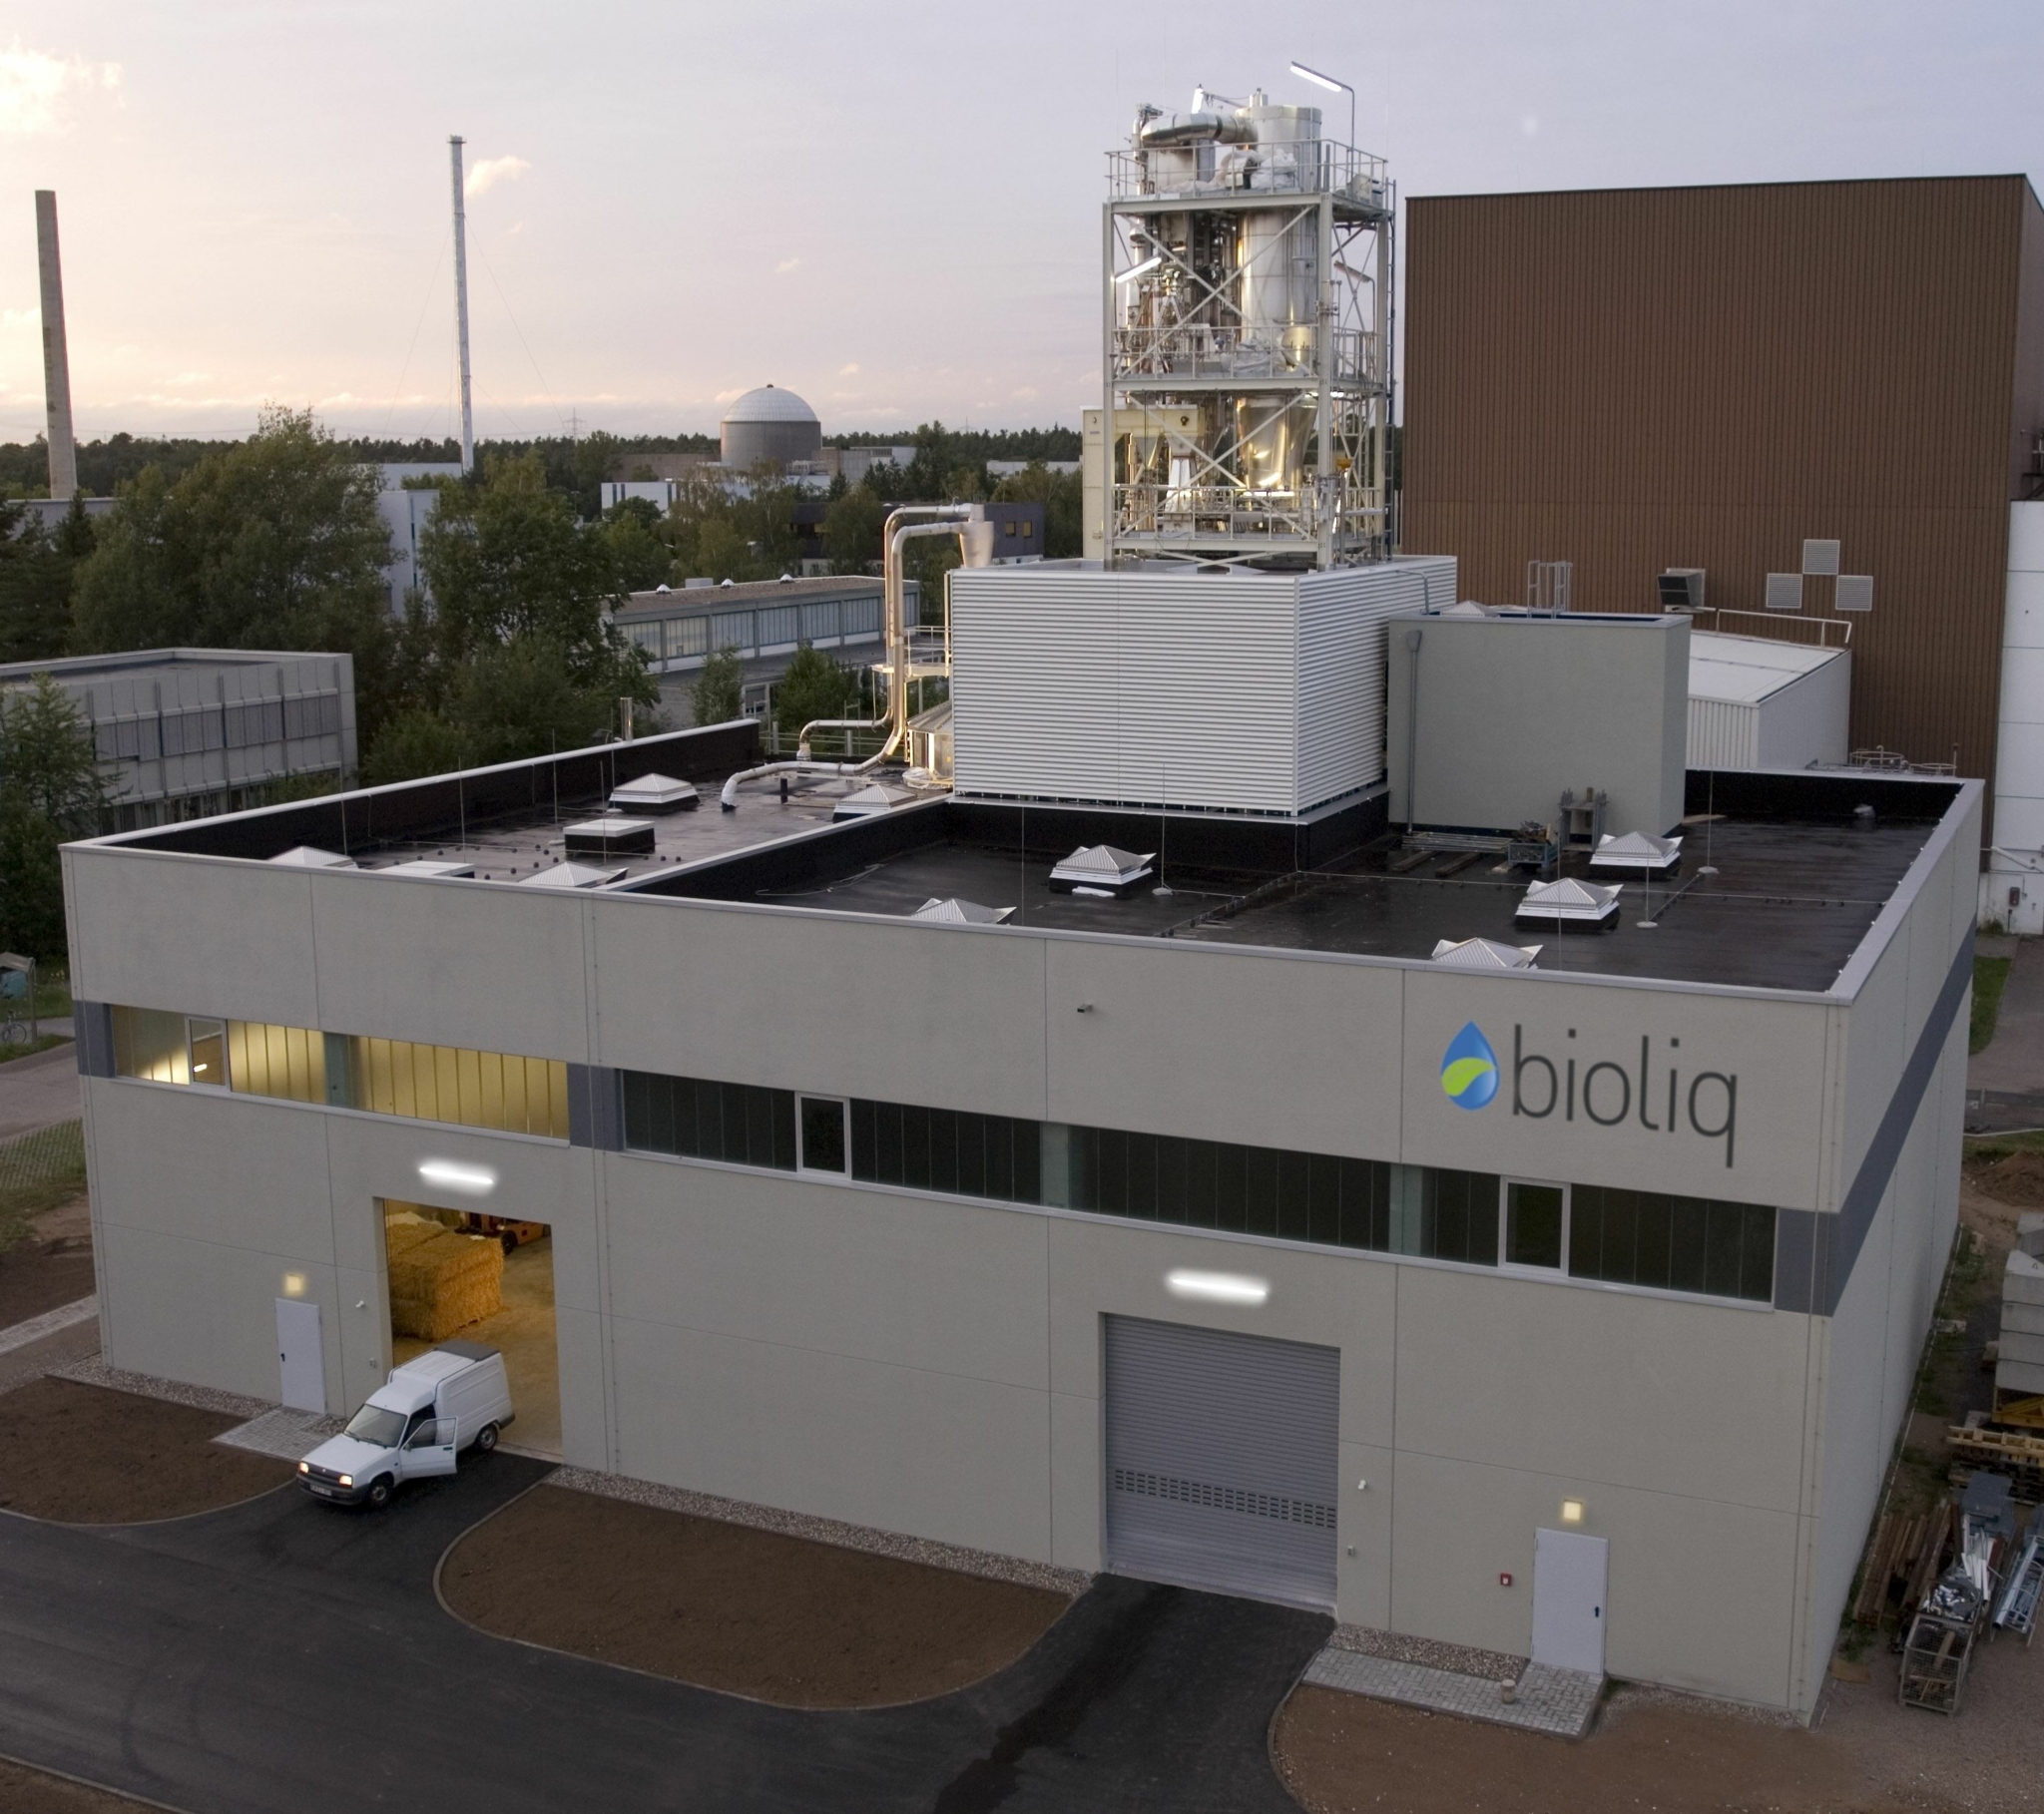 The bioliq® pilot plant in Karlsruhe is a conversion plant.